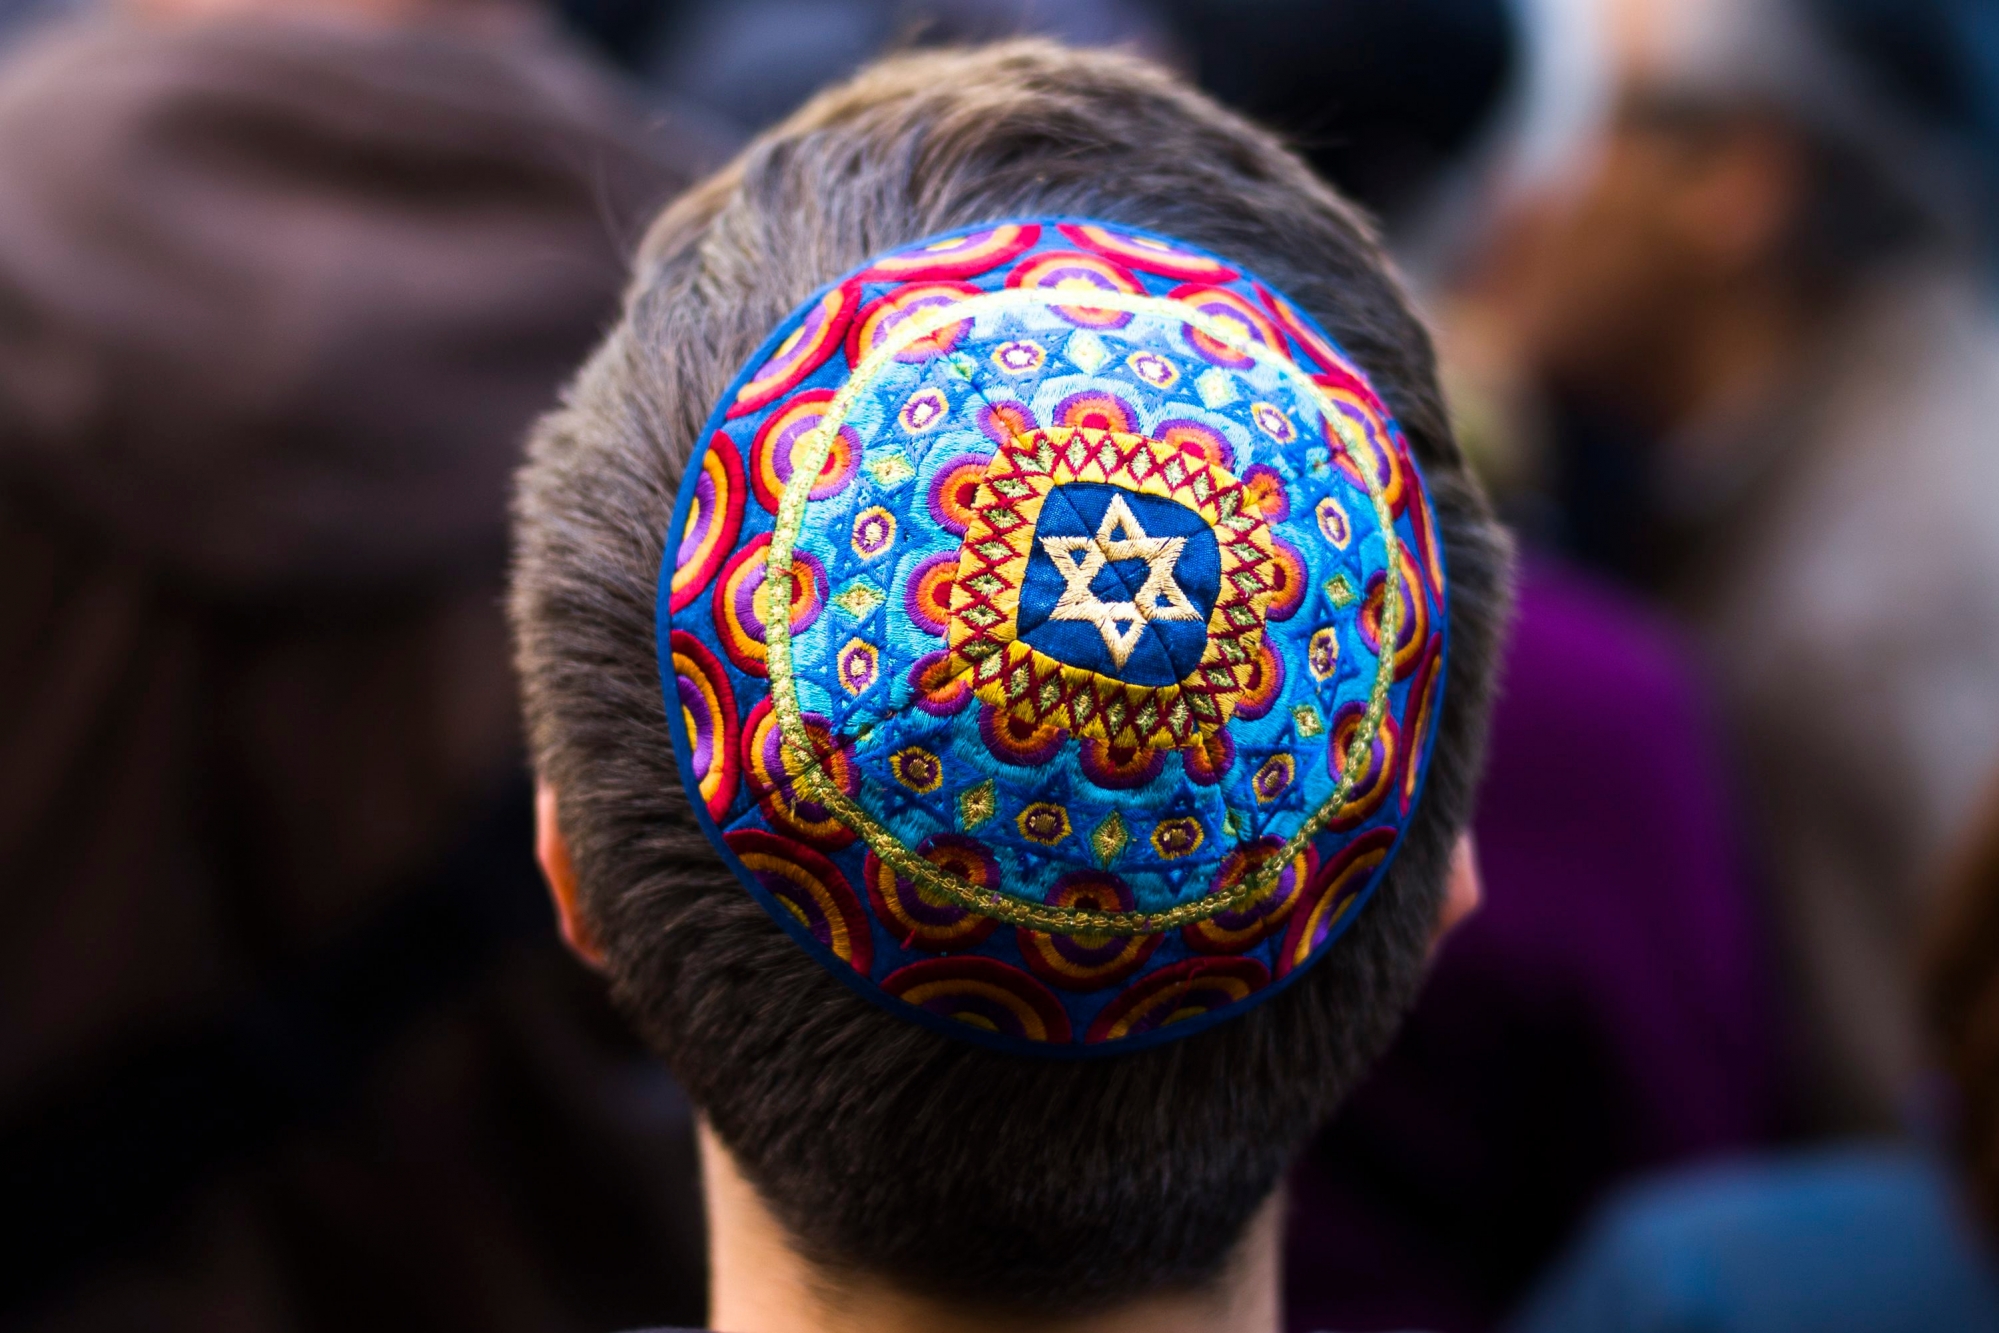 A man wears a Jewish skullcap, as he attends a demonstration against an anti-Semitic attack in Berlin, Wednesday, April 25, 2018. (AP Photo/Markus Schreiber) Germany Anti Semitism